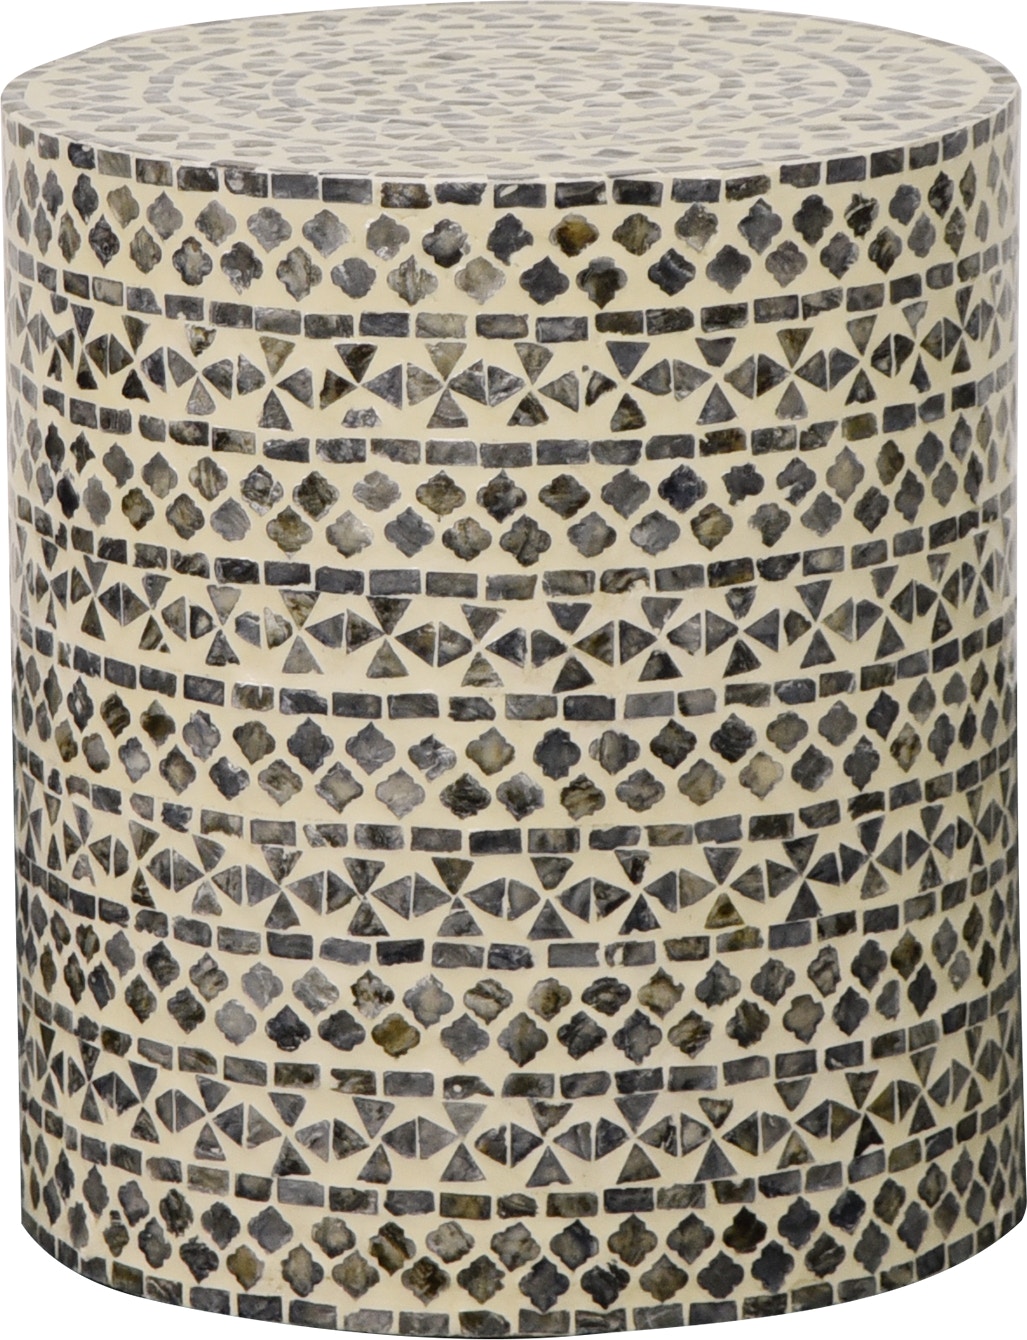 First Avenue GA ROUND ACCENT TABLE - GREY TRIBAL